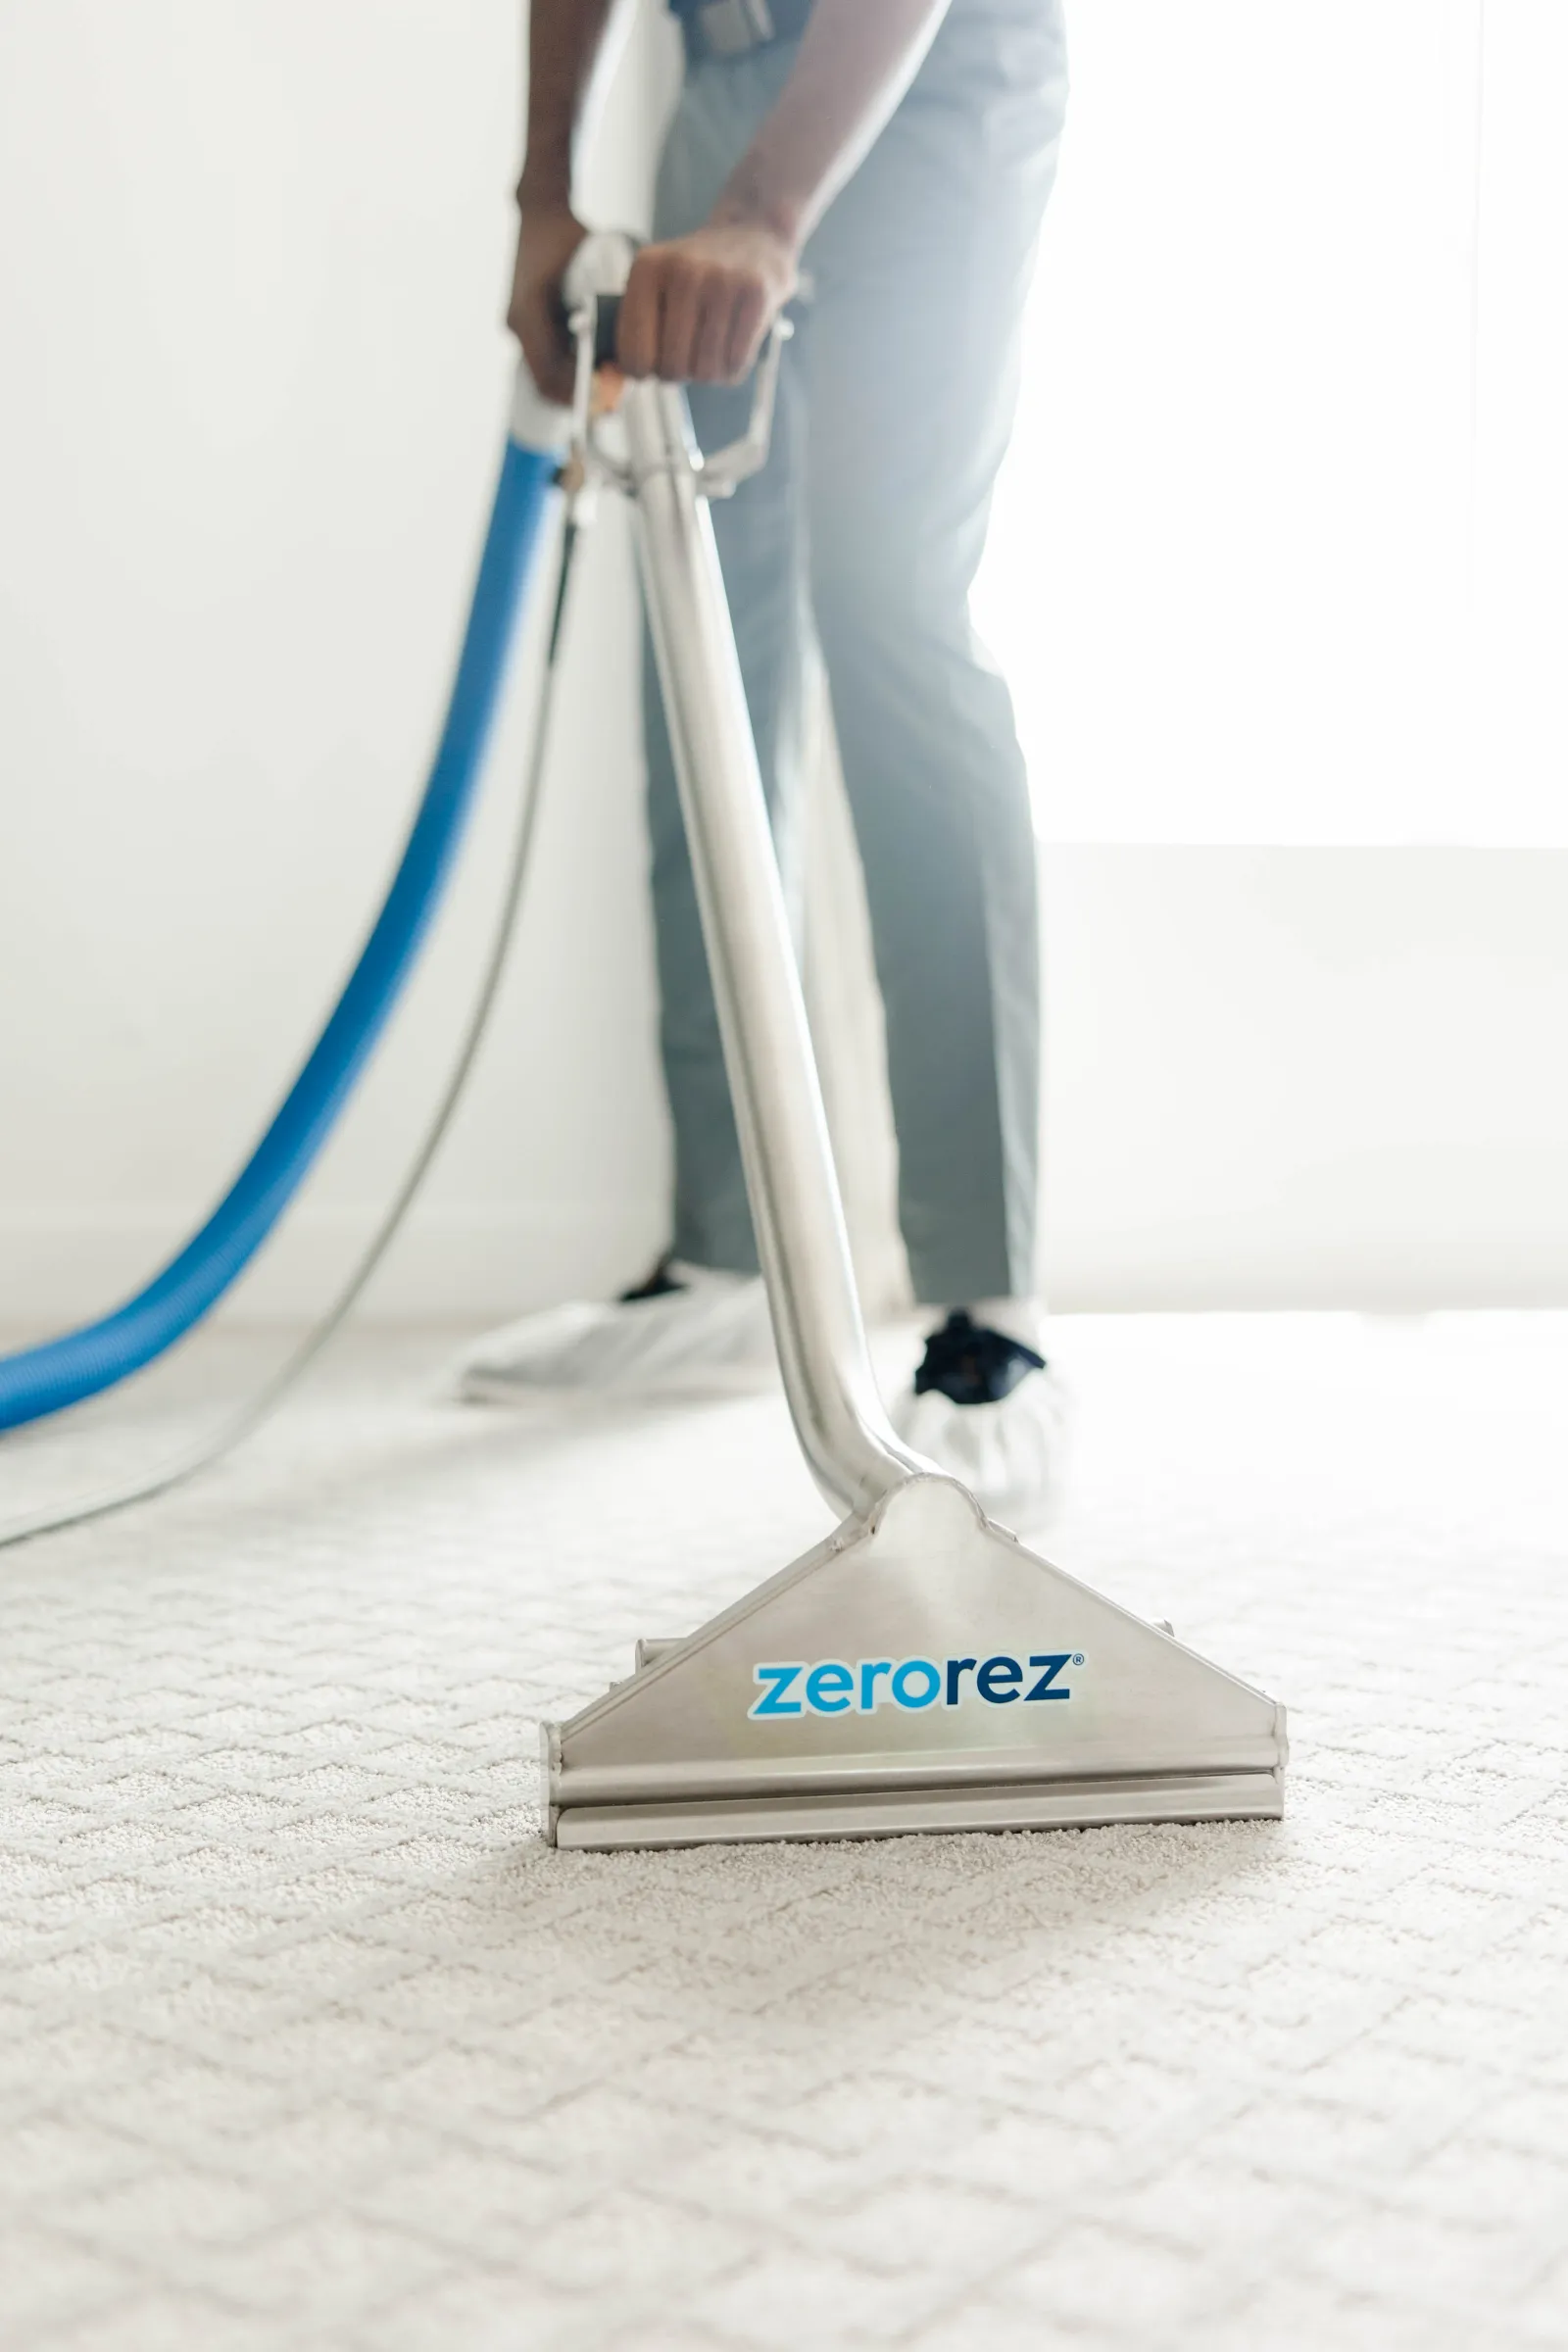 Zerorez technician using the Zr Wand to clean a white carpet good for allergies and asthma sufferers